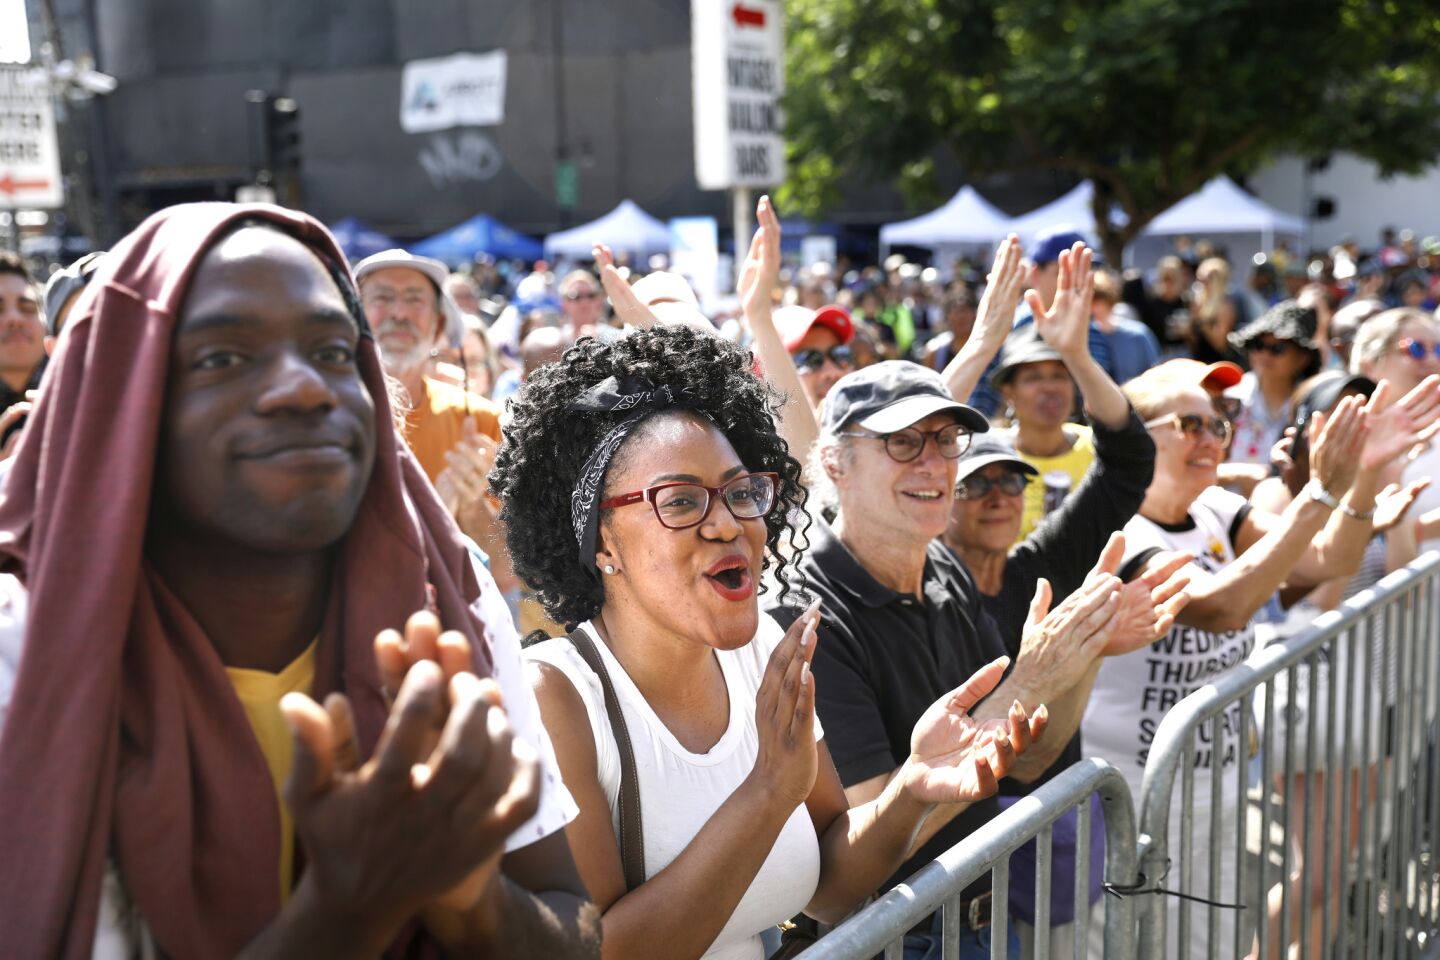 A crowd including Michael Boateng, 35, and Jasmine Anderson, 30, from left, joins in CicLAvia: Celebrate LA!, a daylong, eight-mile musical street-fair extravaganza.